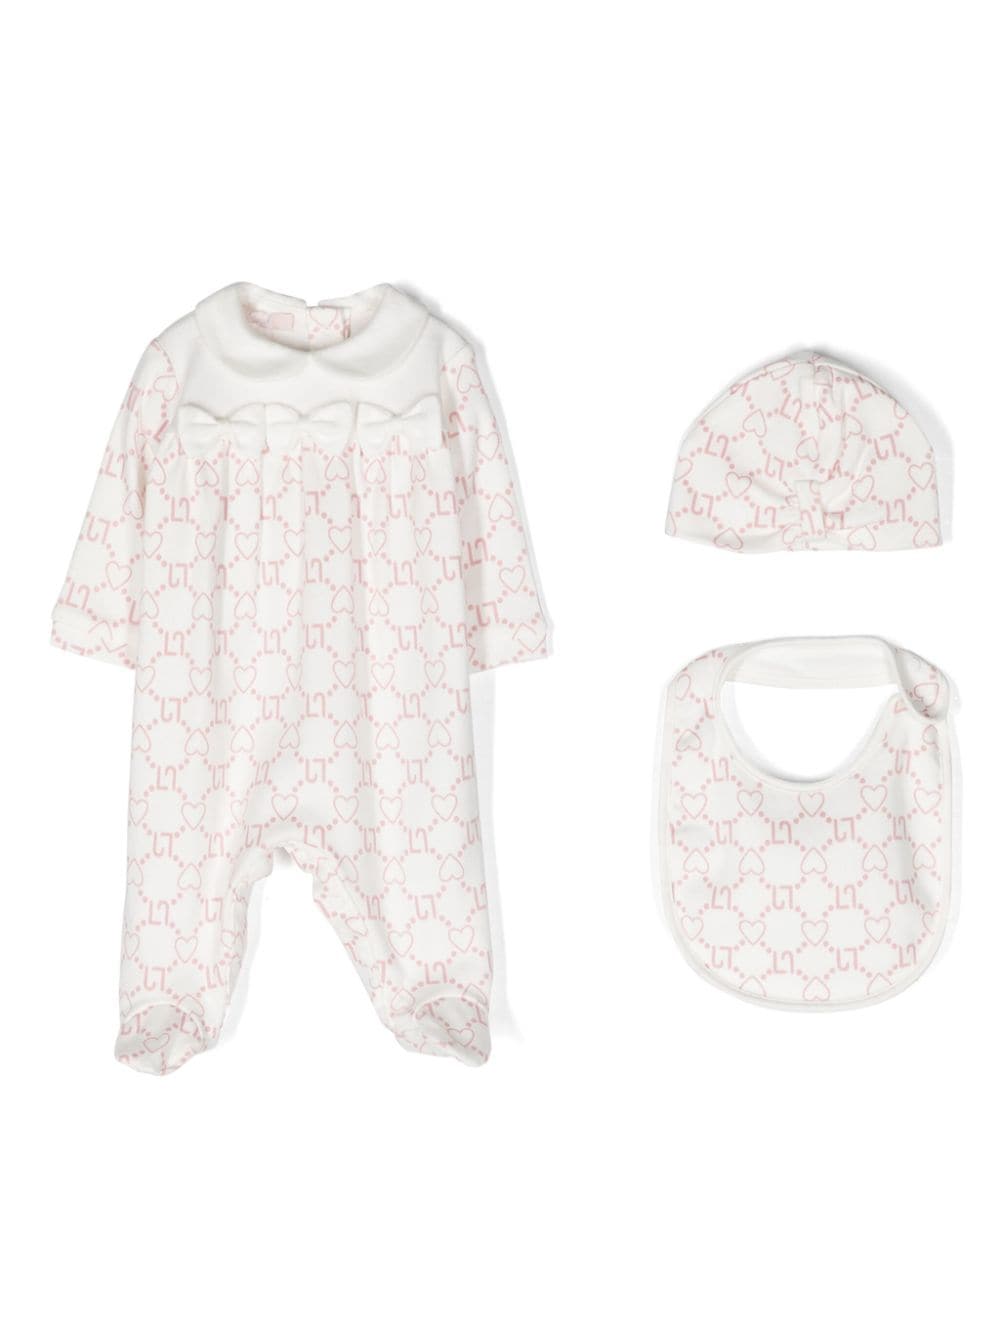 White baby girl onesie with pink logo